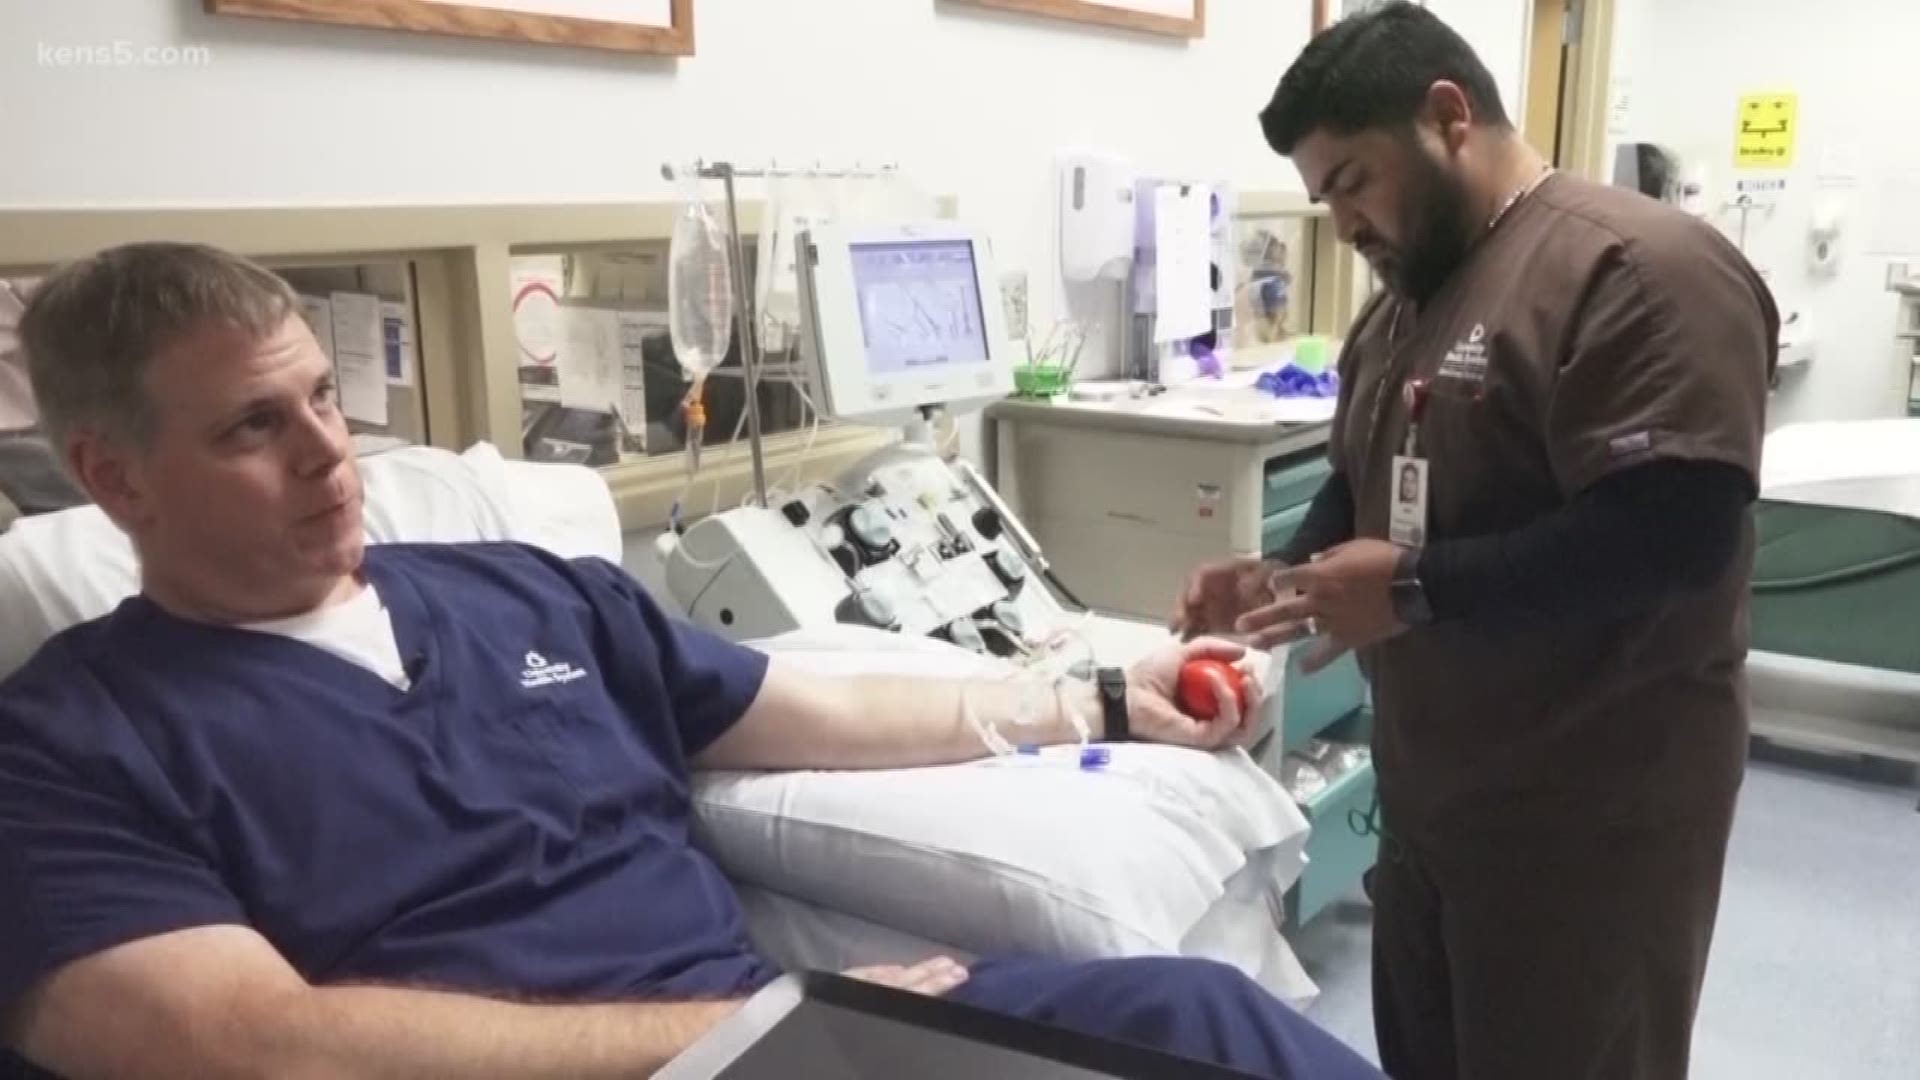 Many of us have donated blood in the past, but what about donating platelets? They are just as important but the process is a little different.